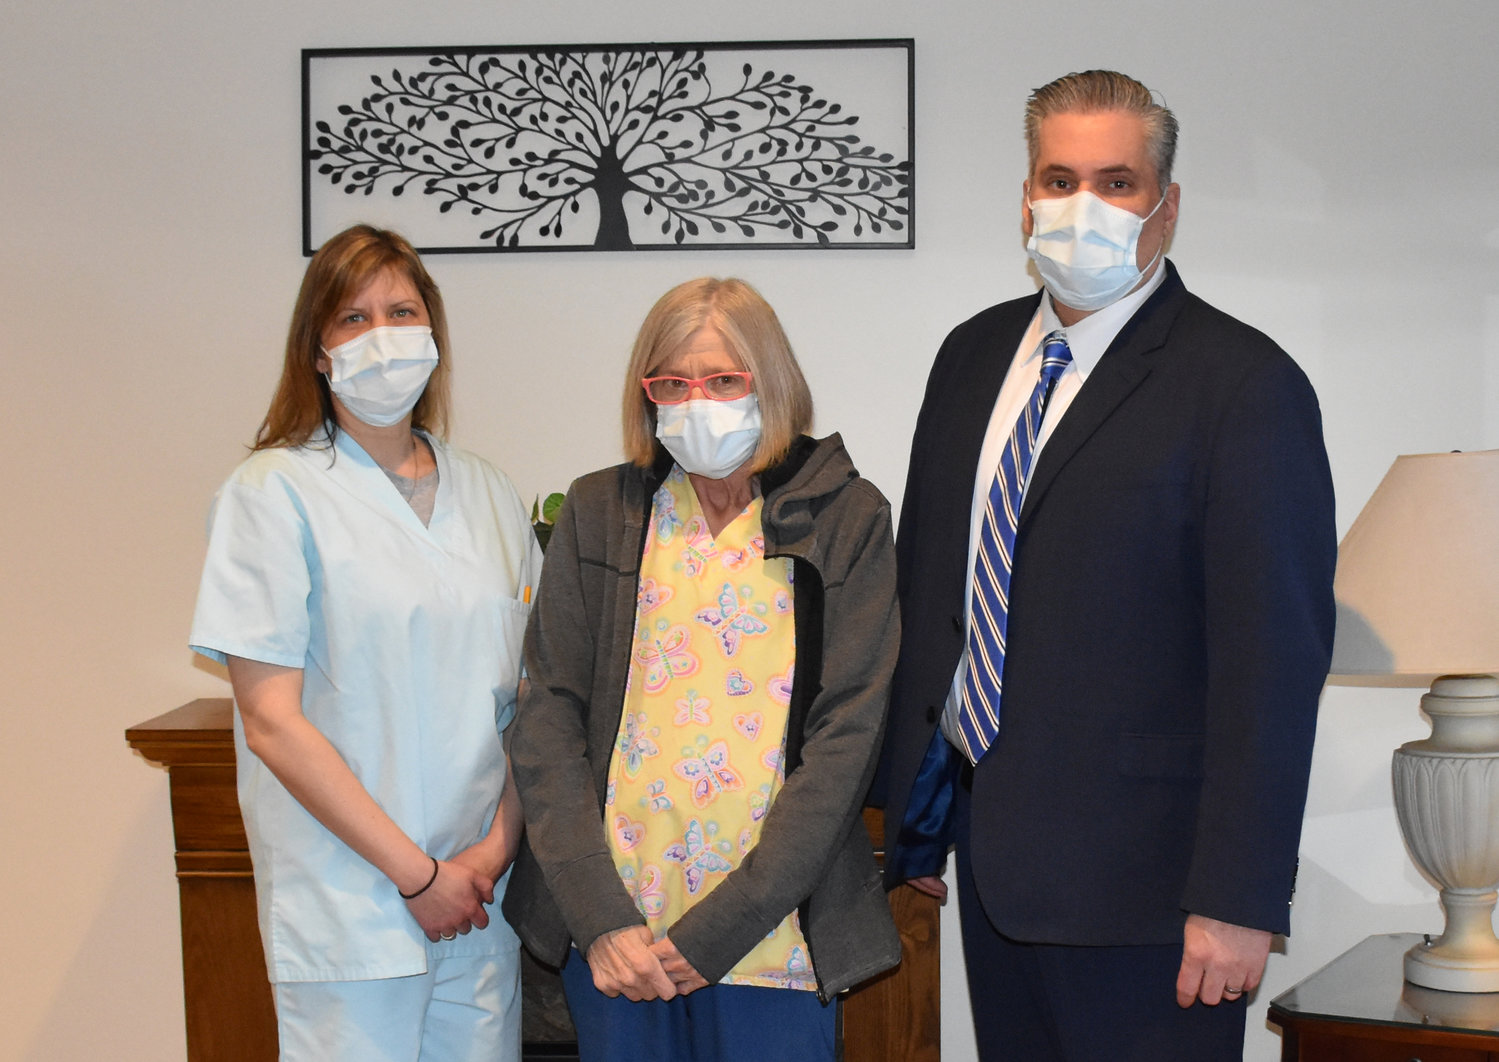 Wayne Woodlands Manor Employee of the Year 2020 Kathy Piorkowski, RN, is flanked by director of nursing Kelly Miller, RN, left, and Wayne Woodlands Administrator Michael Freund.